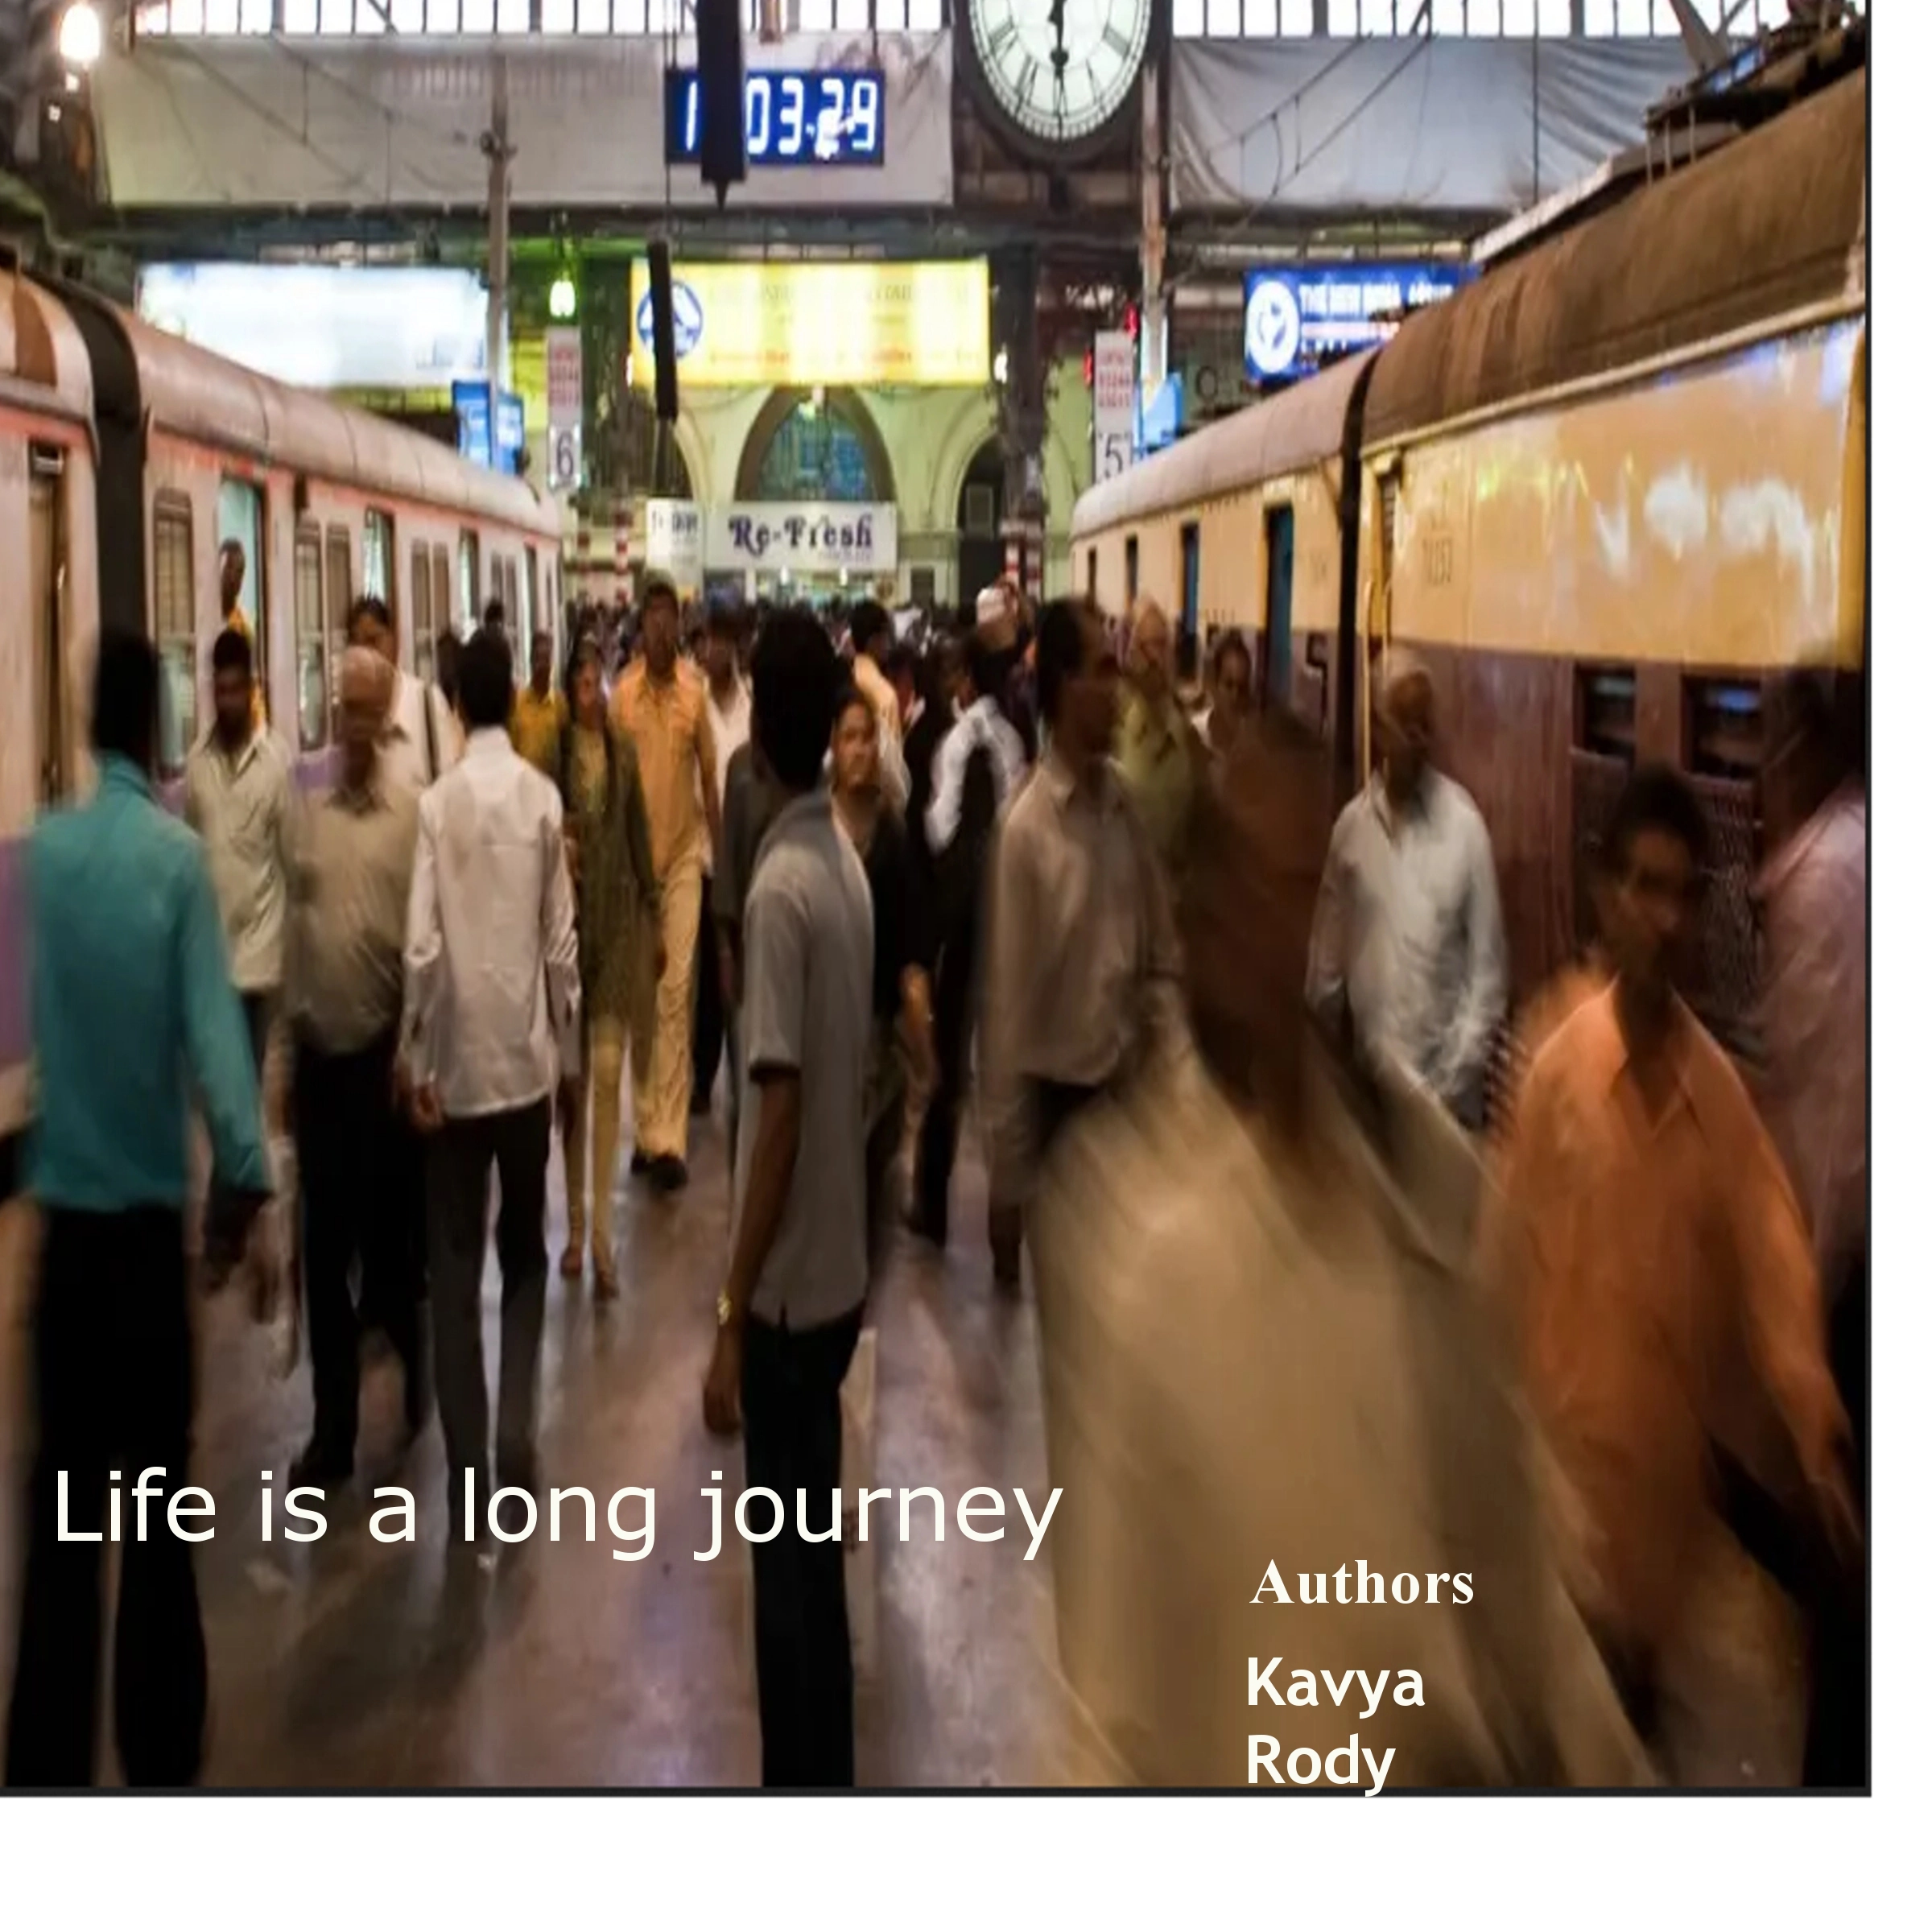 Life is a long journey by Rody Audiobook